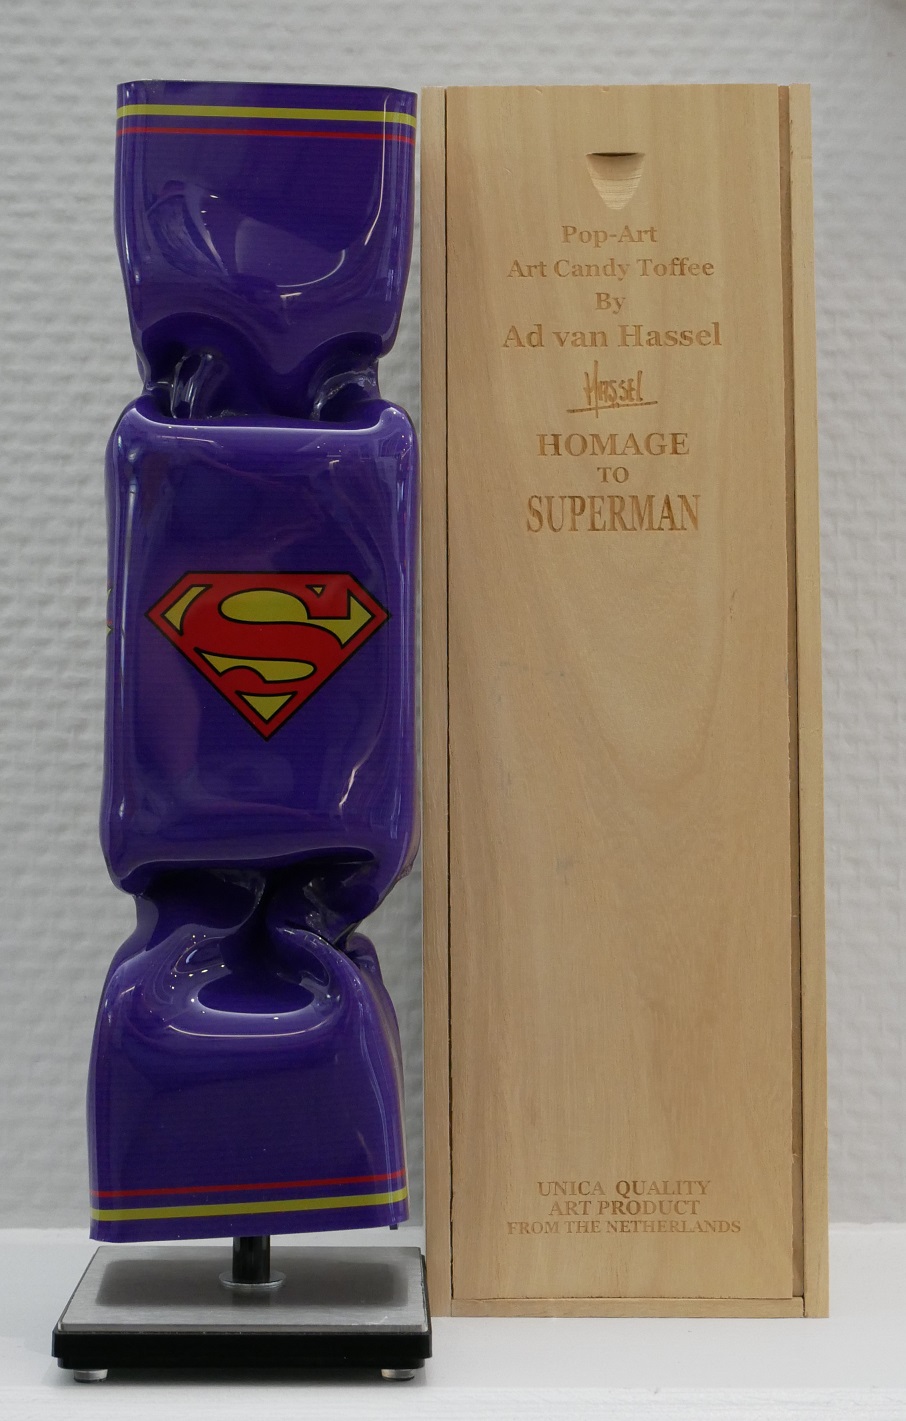 Art Candy - Hommage to Superman